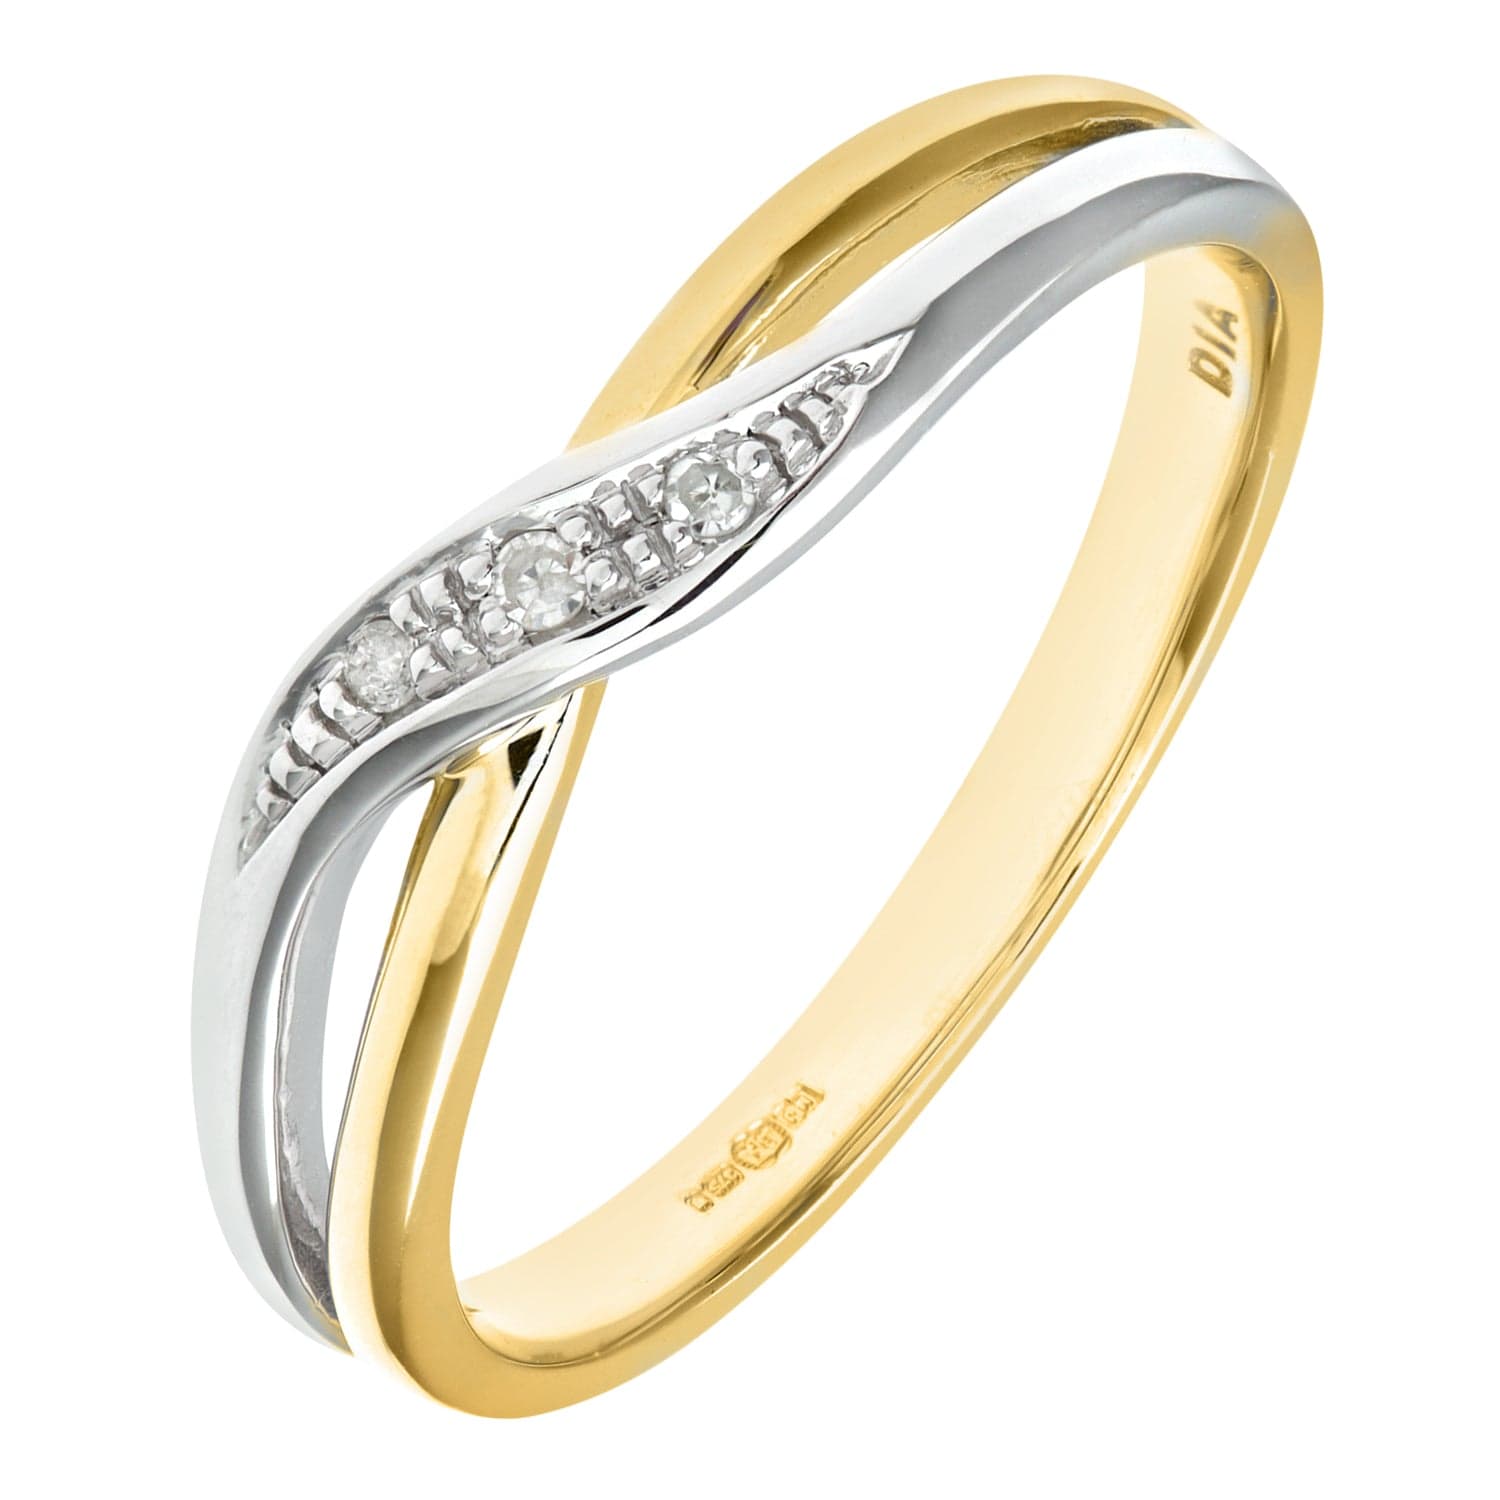 Lynora Luxe Ring Yellow Gold 9ct / Diamond 9ct Yellow Gold Diamond Crossover Ring